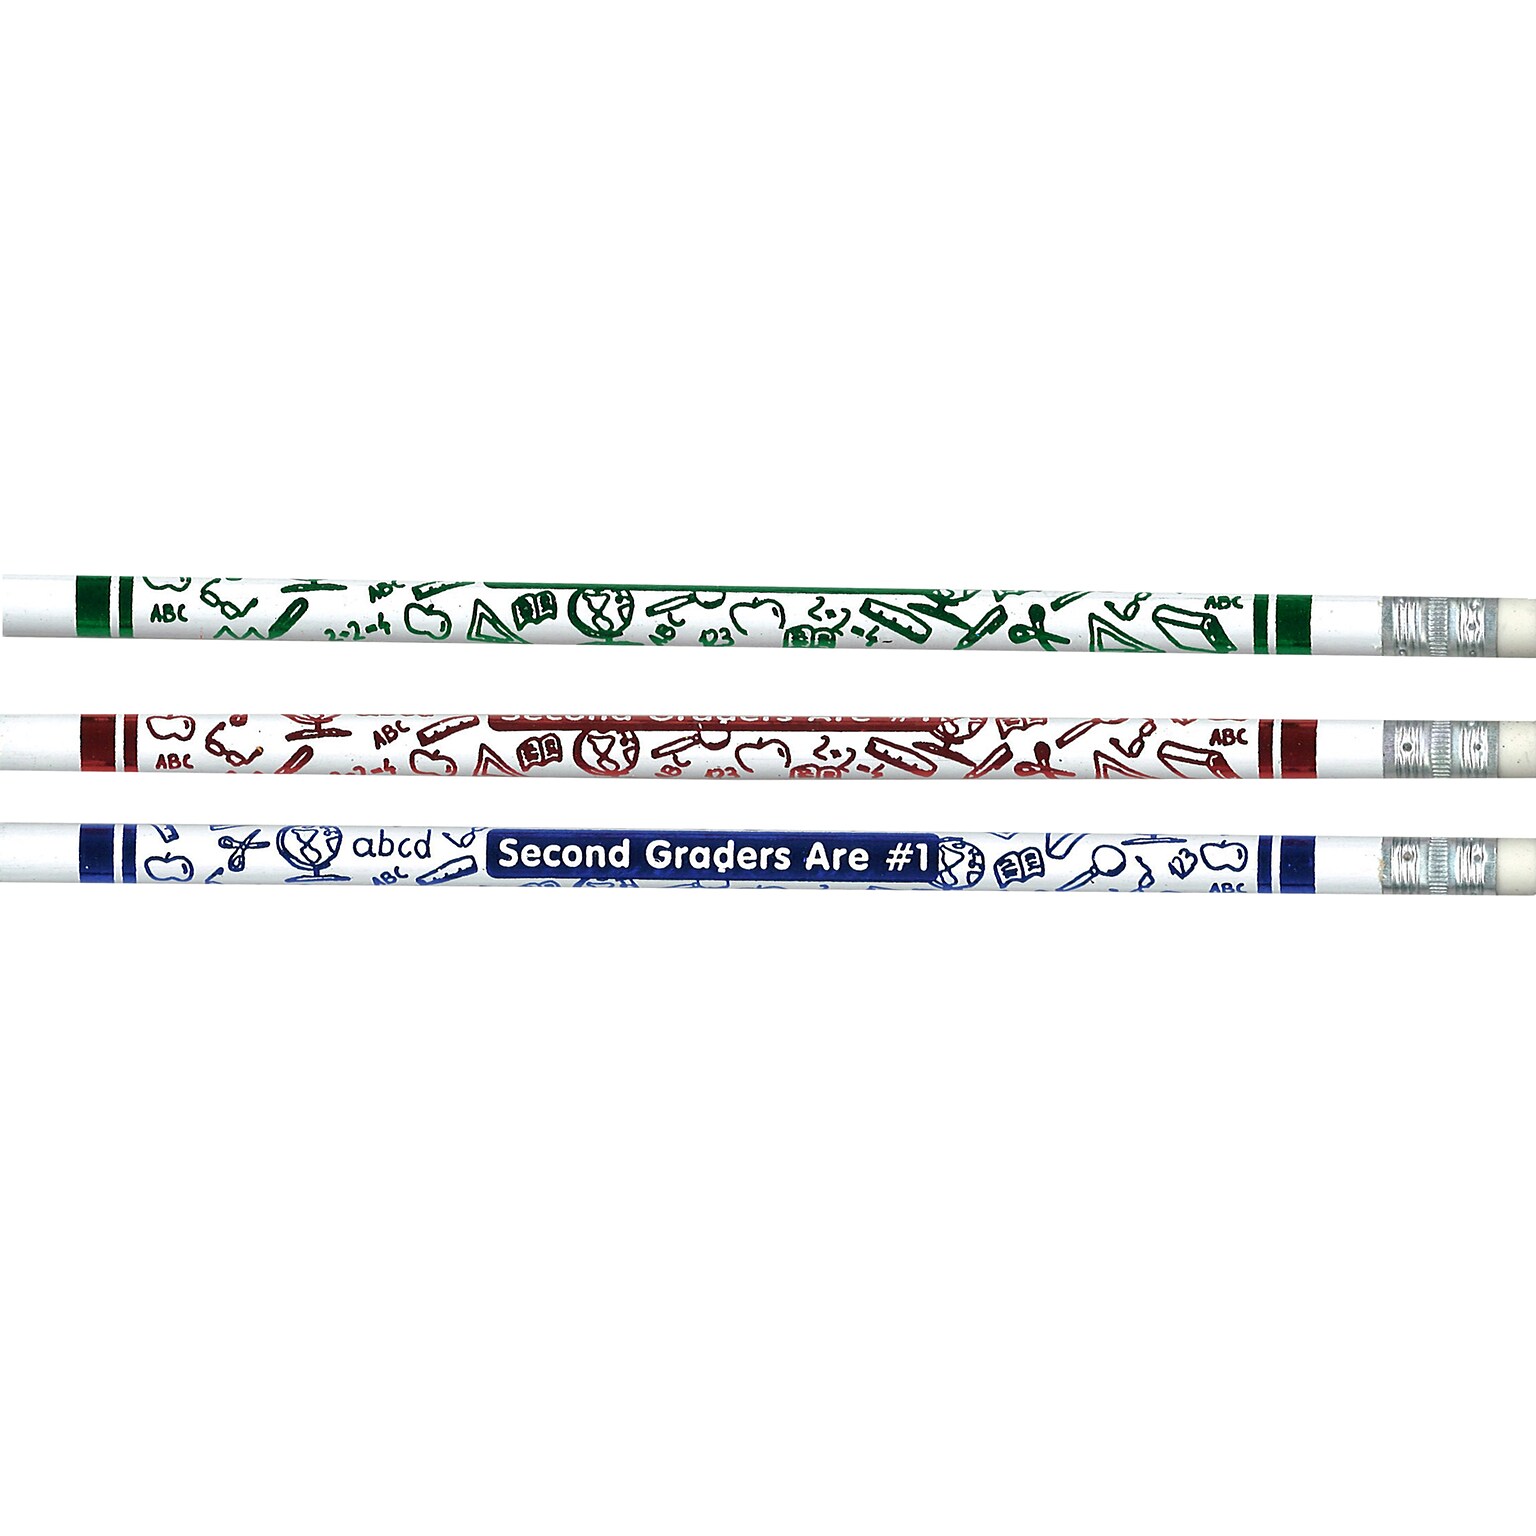 Moon Products Pencils 2nd Graders Are #1, 12 Per Pack, 12 Packs (JRM7862B-12)